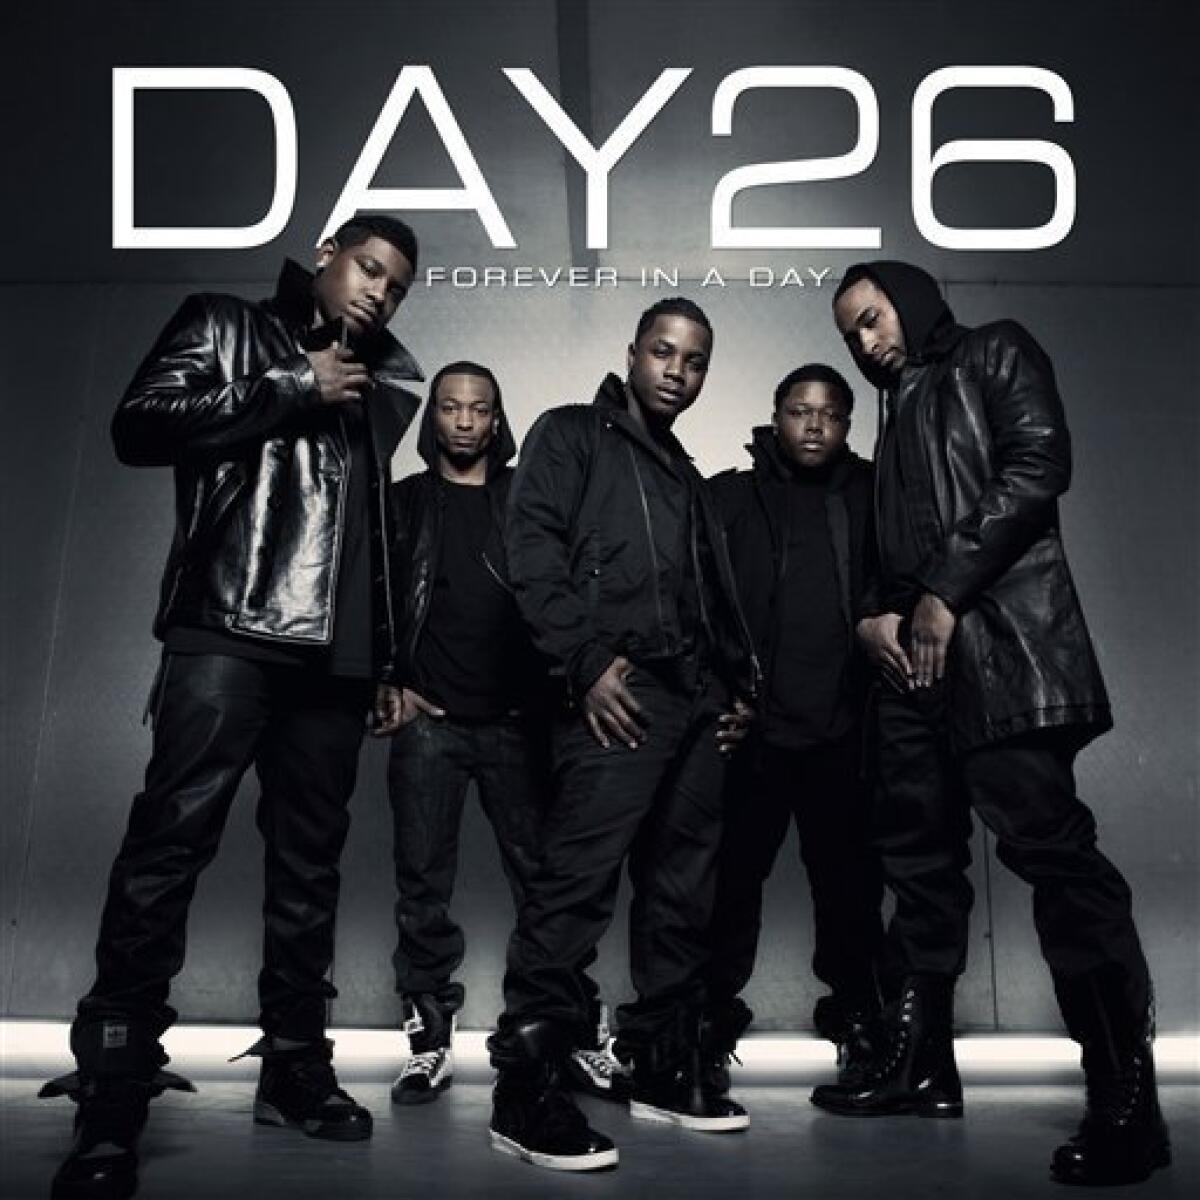 In this image released by Bad Boy Records, the latest CD by Day26, "Forever In A Day," is shown. (AP Photo/Bad Boy Records)